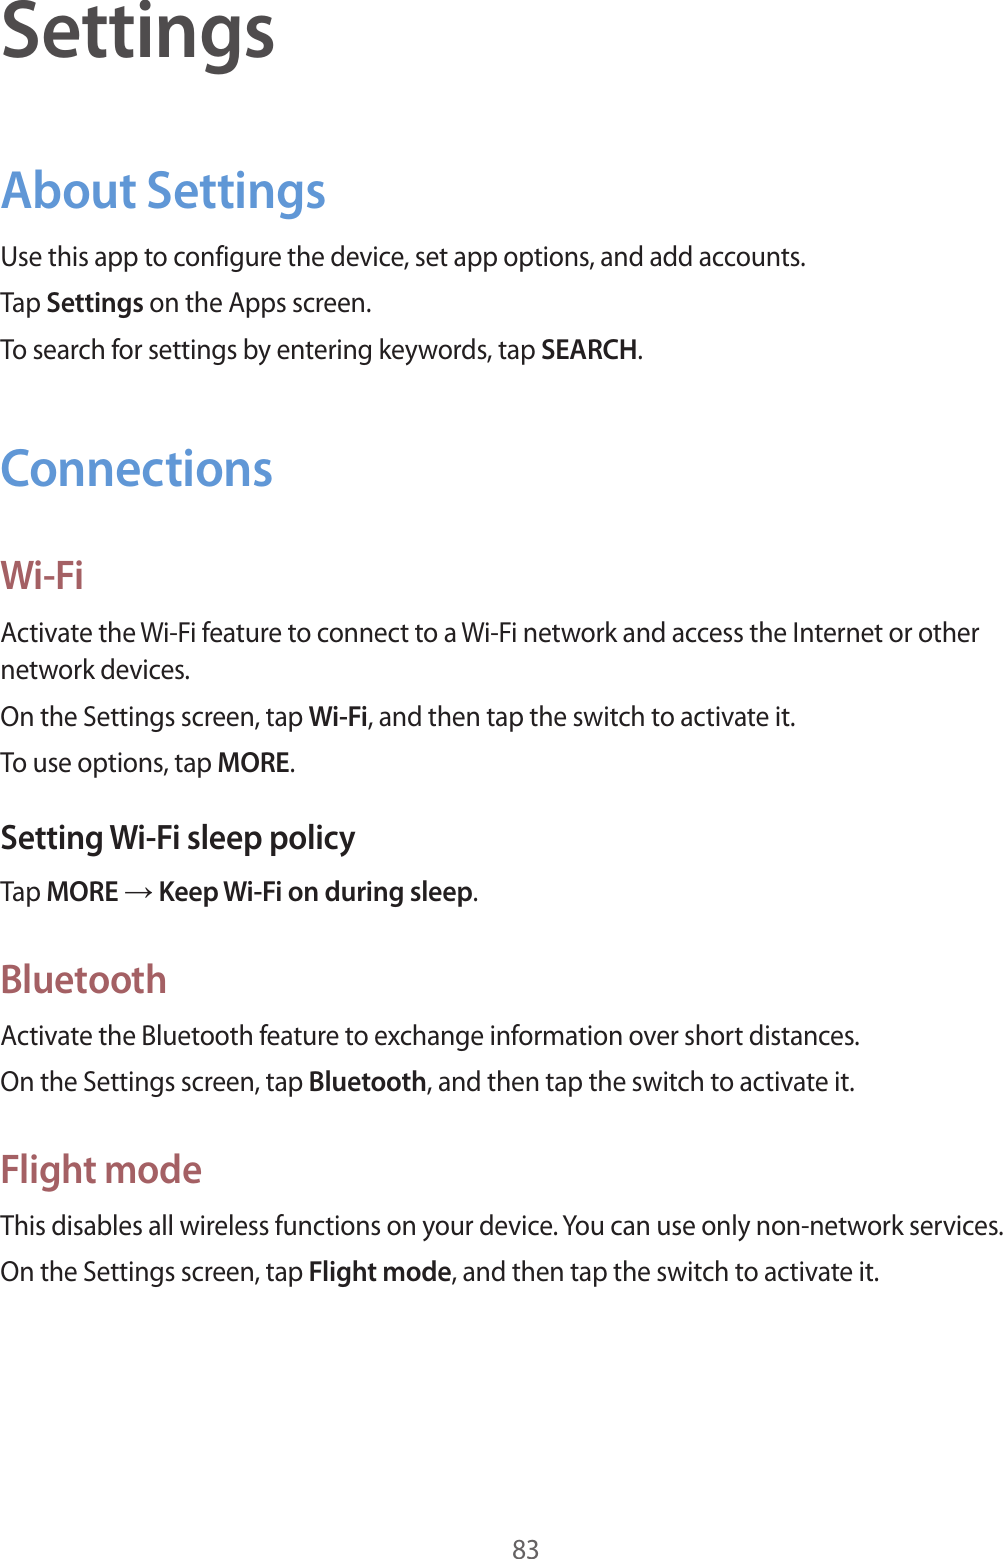 83SettingsAbout SettingsUse this app to configure the device, set app options, and add accounts.Tap Settings on the Apps screen.To search for settings by entering keywords, tap SEARCH.ConnectionsWi-FiActivate the Wi-Fi feature to connect to a Wi-Fi network and access the Internet or other network devices.On the Settings screen, tap Wi-Fi, and then tap the switch to activate it.To use options, tap MORE.Setting Wi-Fi sleep policyTap MORE → Keep Wi-Fi on during sleep.BluetoothActivate the Bluetooth feature to exchange information over short distances.On the Settings screen, tap Bluetooth, and then tap the switch to activate it.Flight modeThis disables all wireless functions on your device. You can use only non-network services.On the Settings screen, tap Flight mode, and then tap the switch to activate it.